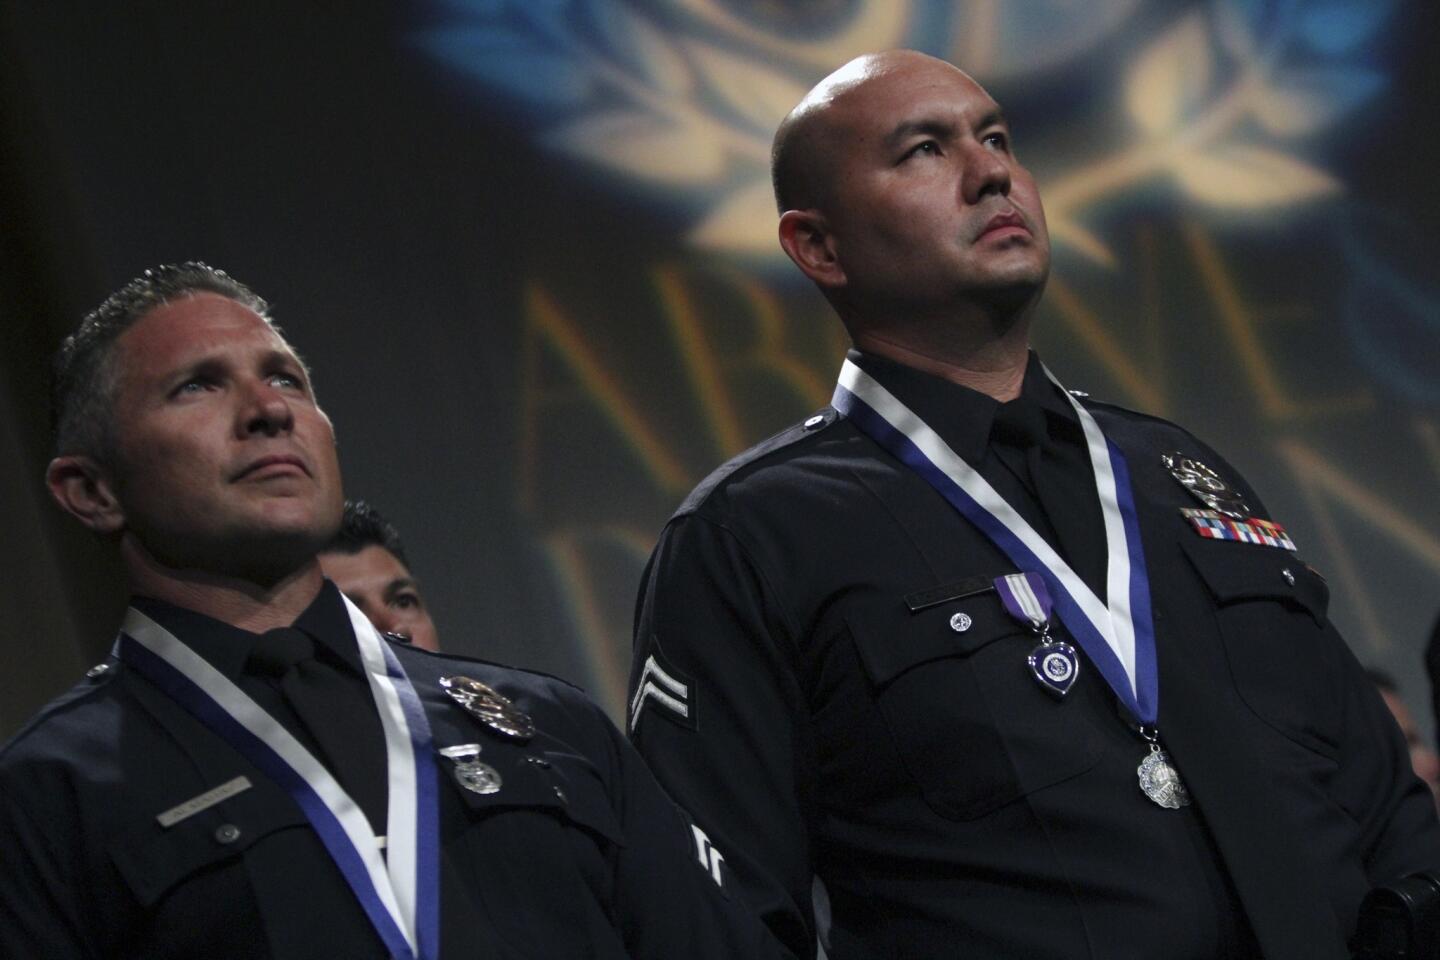 LAPD Officer Sean Schneider, right, received a Purple Heart and a Medal of Valor at the LAPD Above and Beyond award presentation at the Dolby Theatre at Hollywood & Highland.